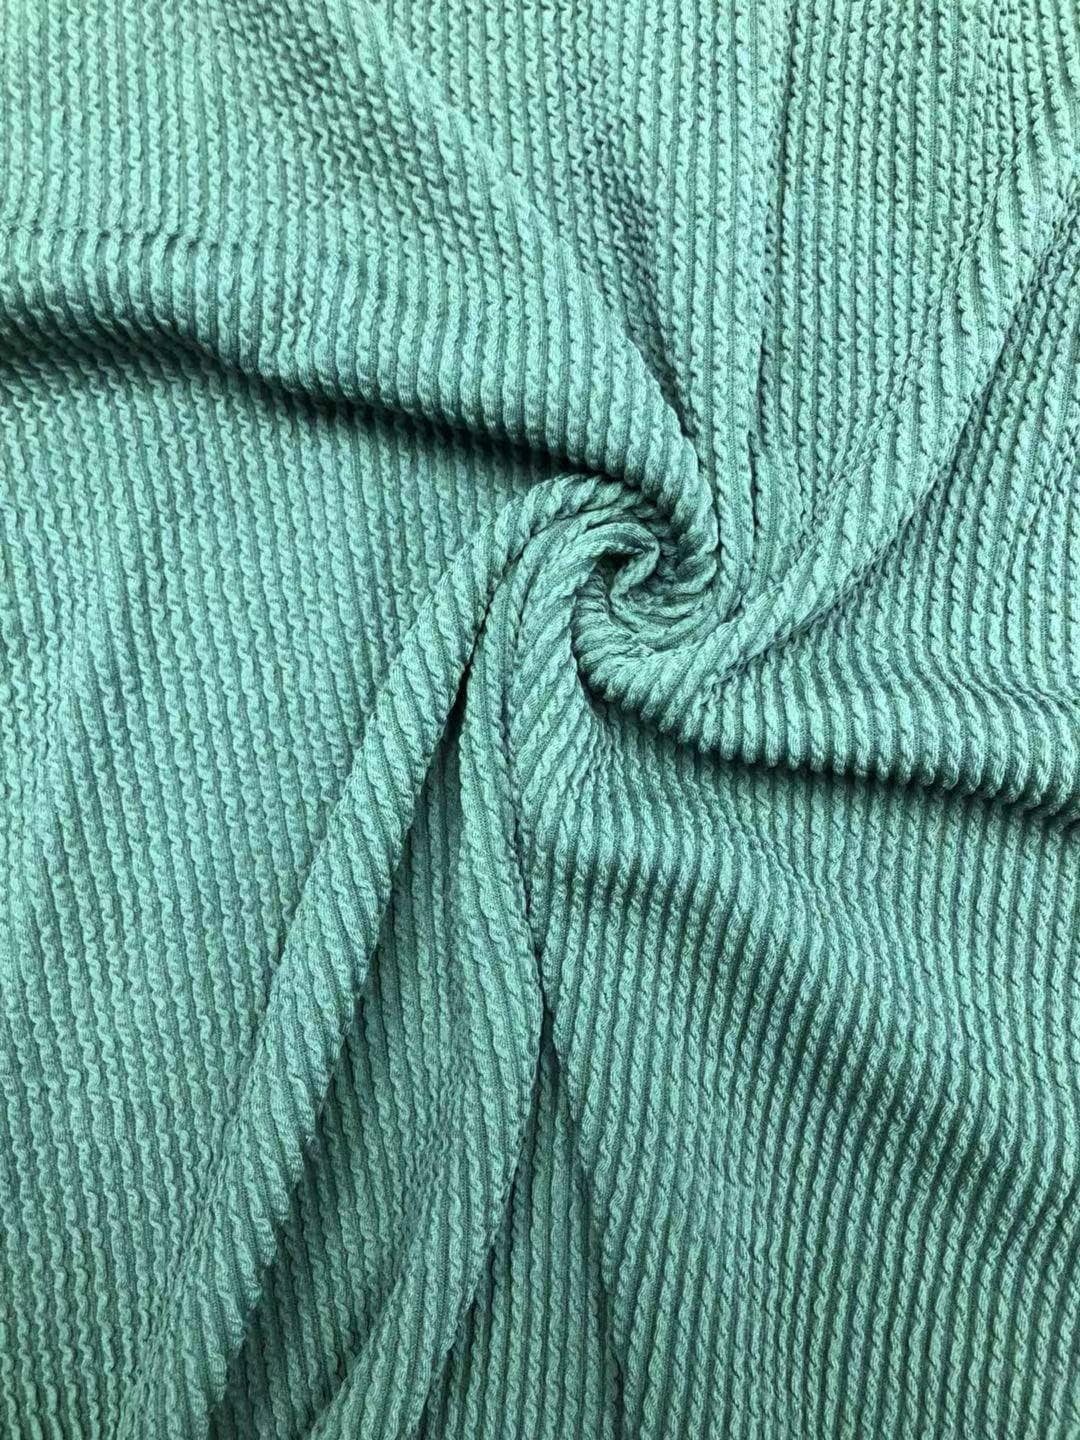 Yarn polyester spandex fabric with crinkle seersucker fabric | Etsy